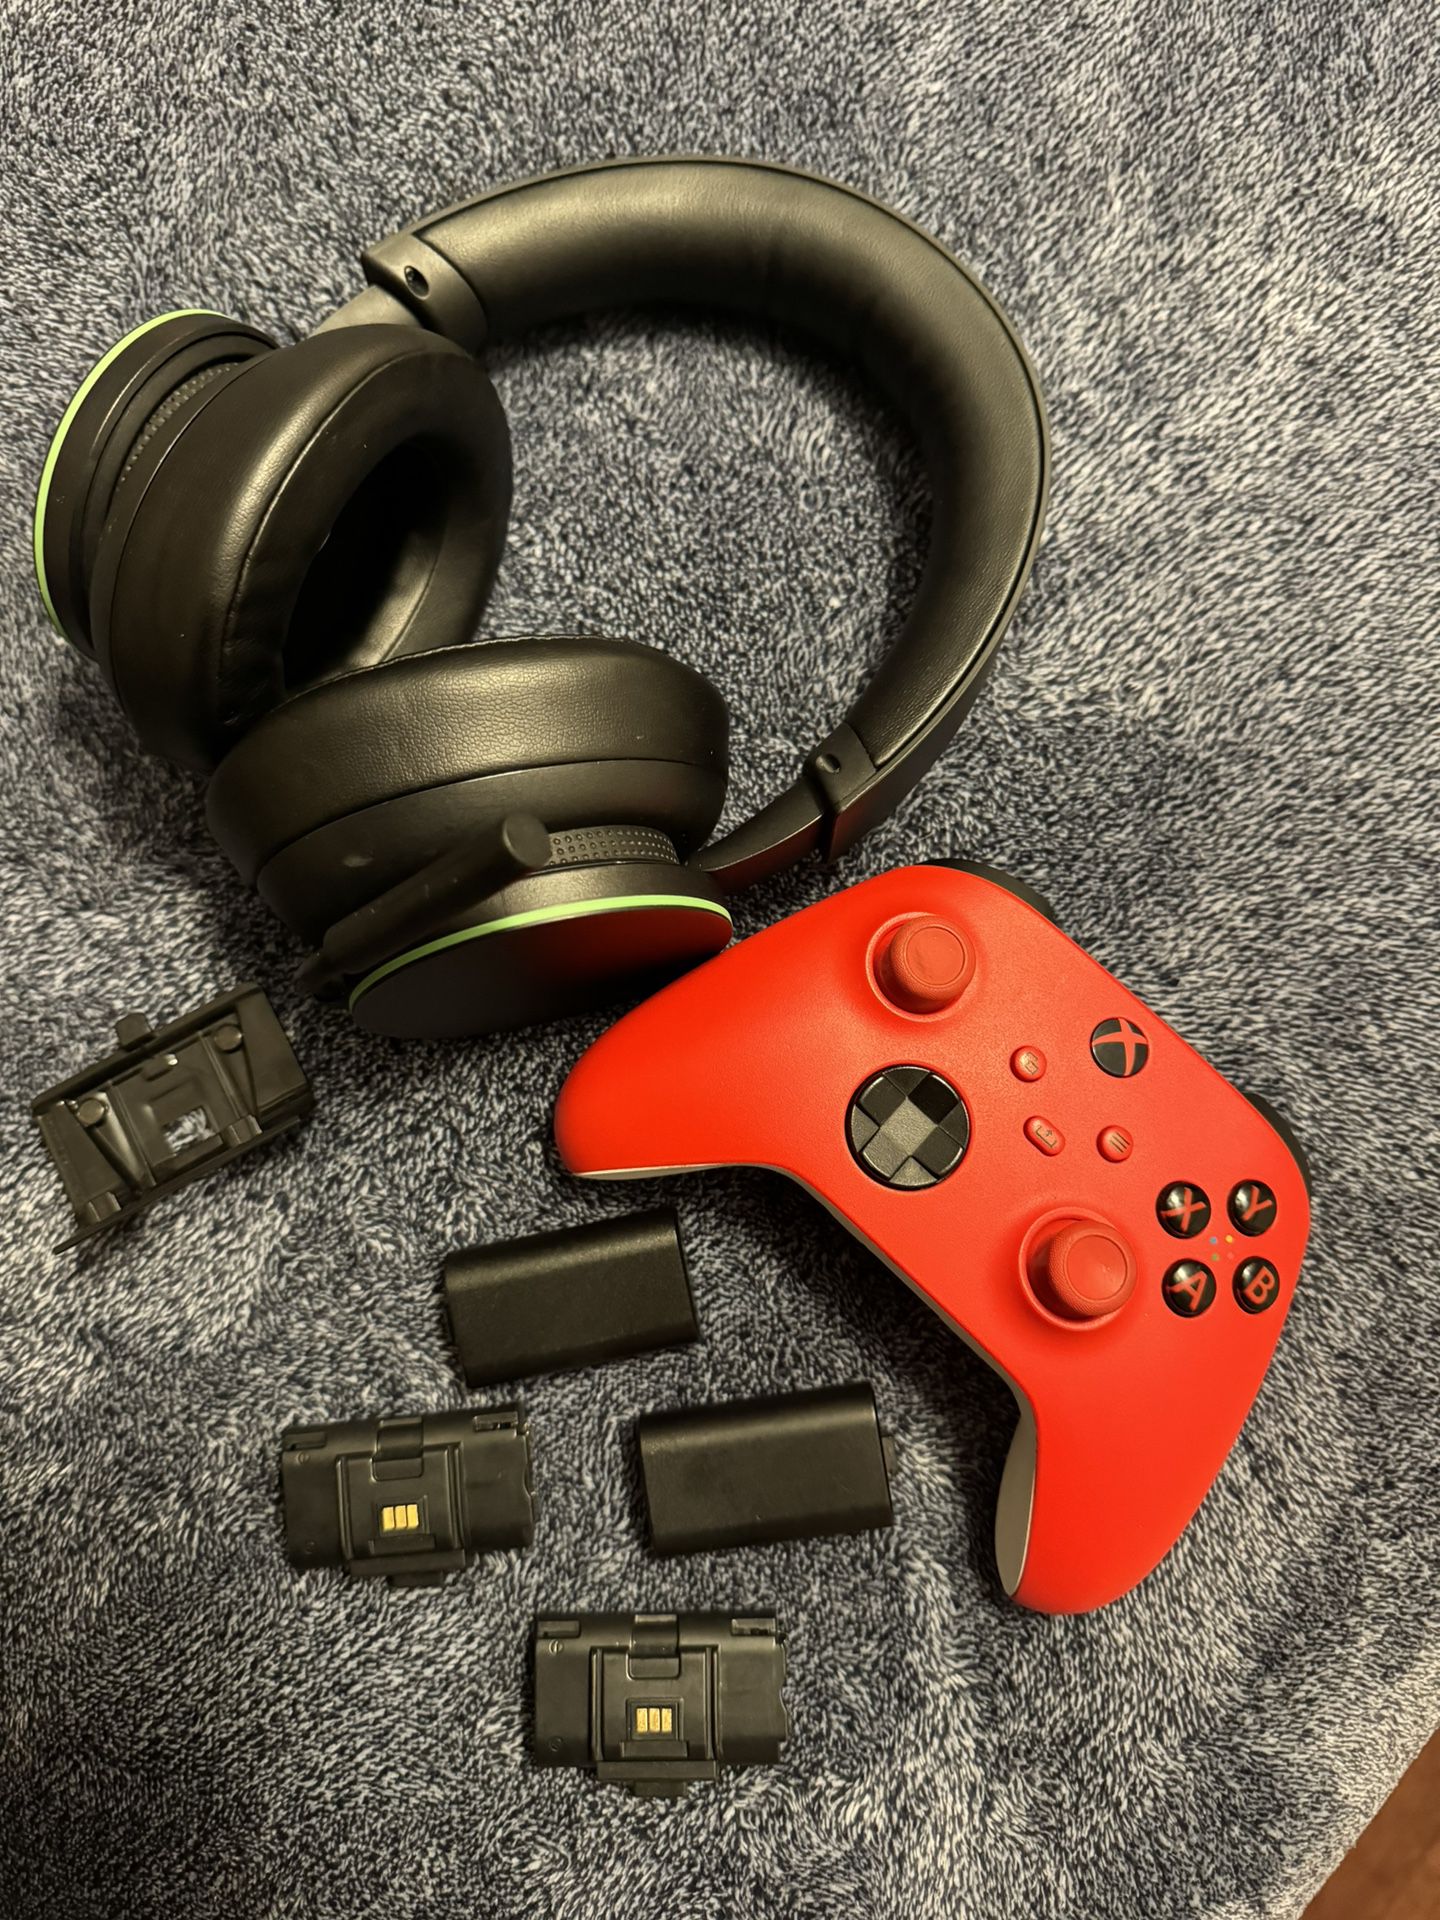 Xbox Red/white Controller With 4 Rechargeable Battery Packs And A Wireless Headset